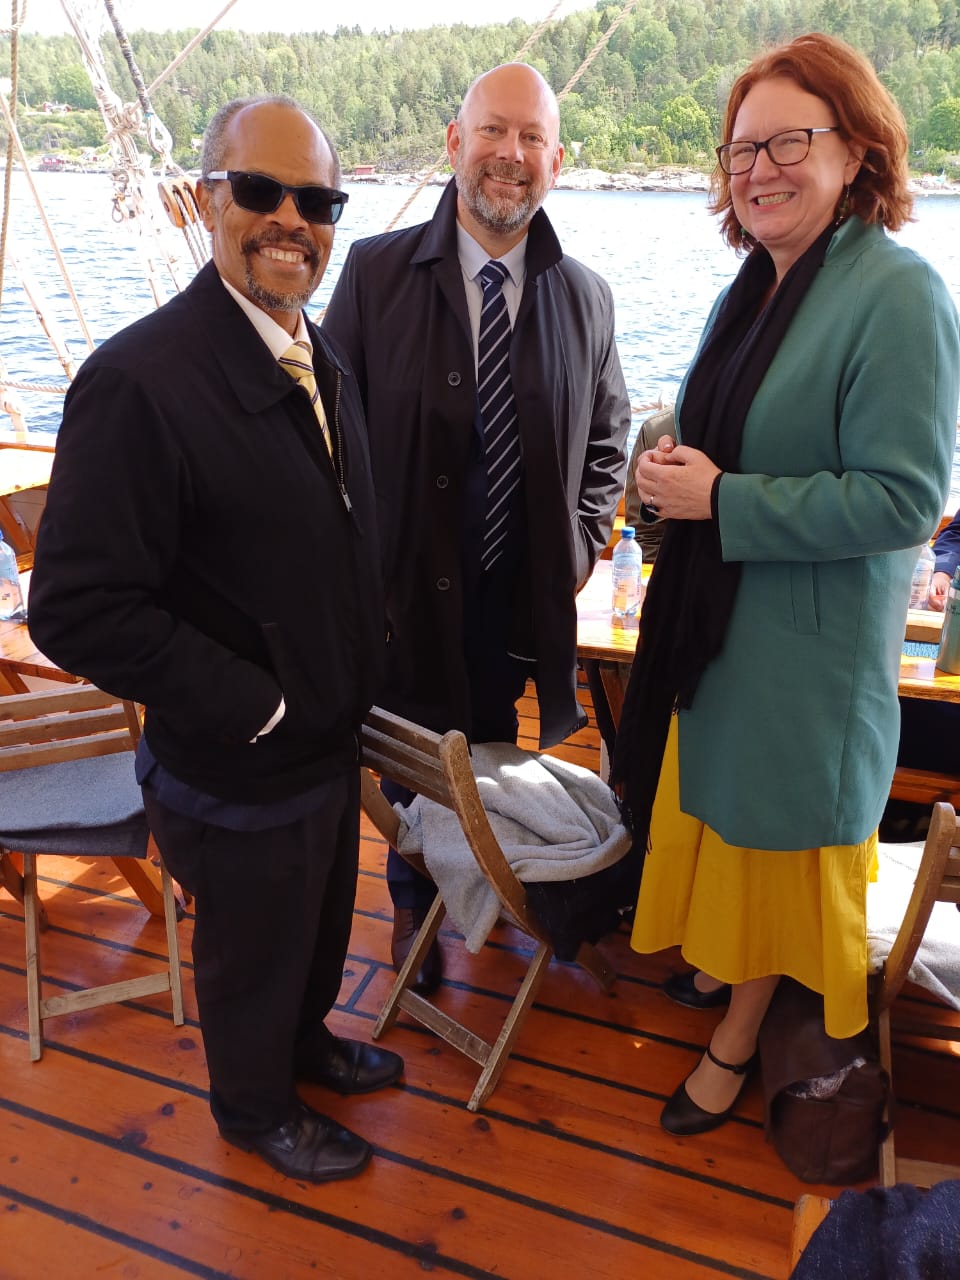 CRFM Executive Director speaking with Marianne Sivertsen Næss, Norwegian Minister of Fisheries and Ocean Policy and Gunnar Stølsvik, Specialist Director at the Blue Justice Secretariat